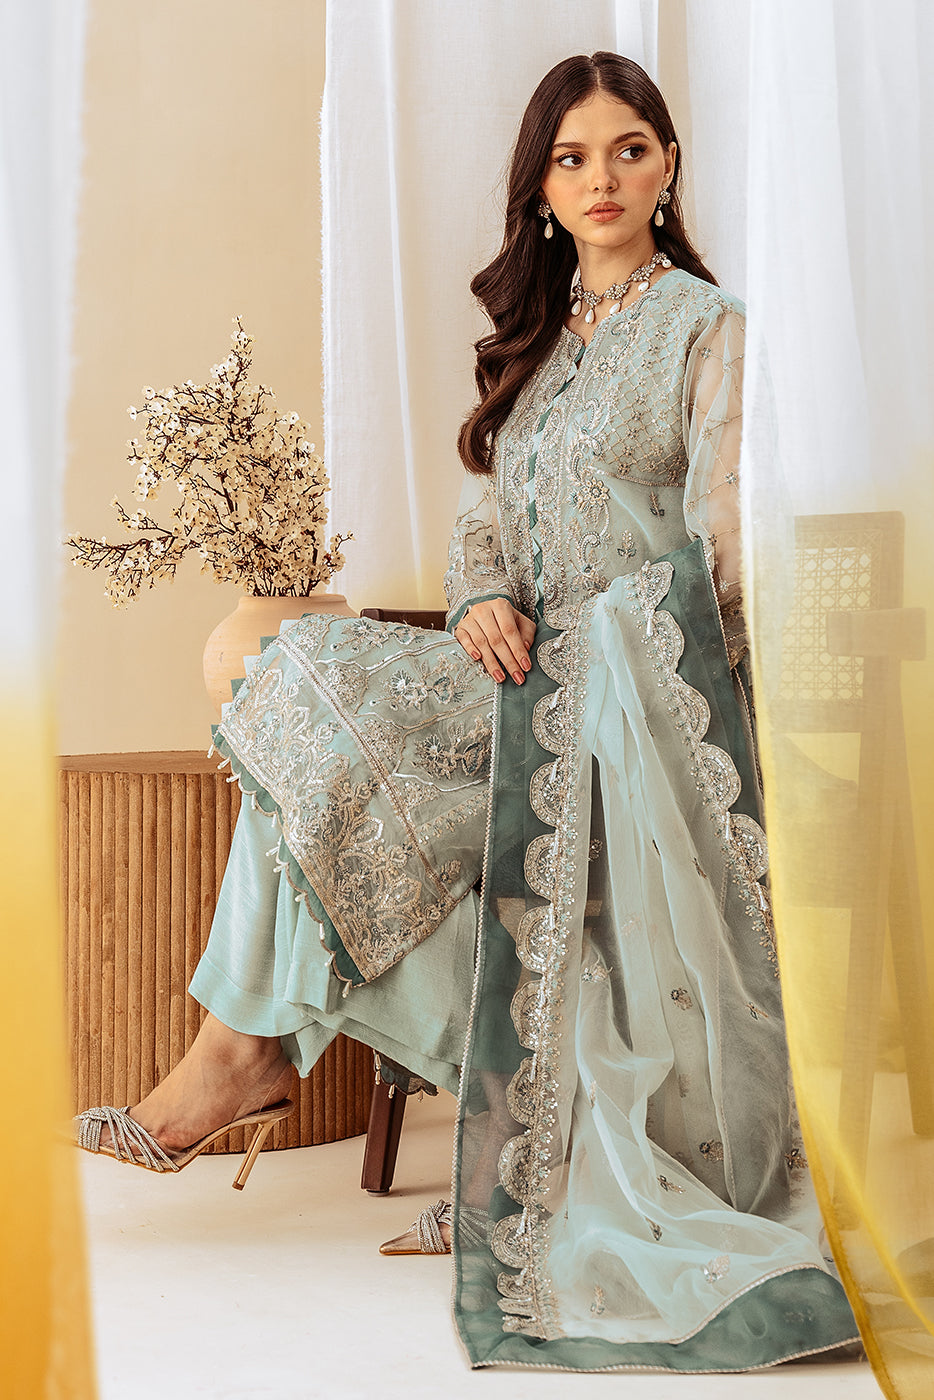 Mint Spring: Elegant 4-piece embroidered organza suit for formal events